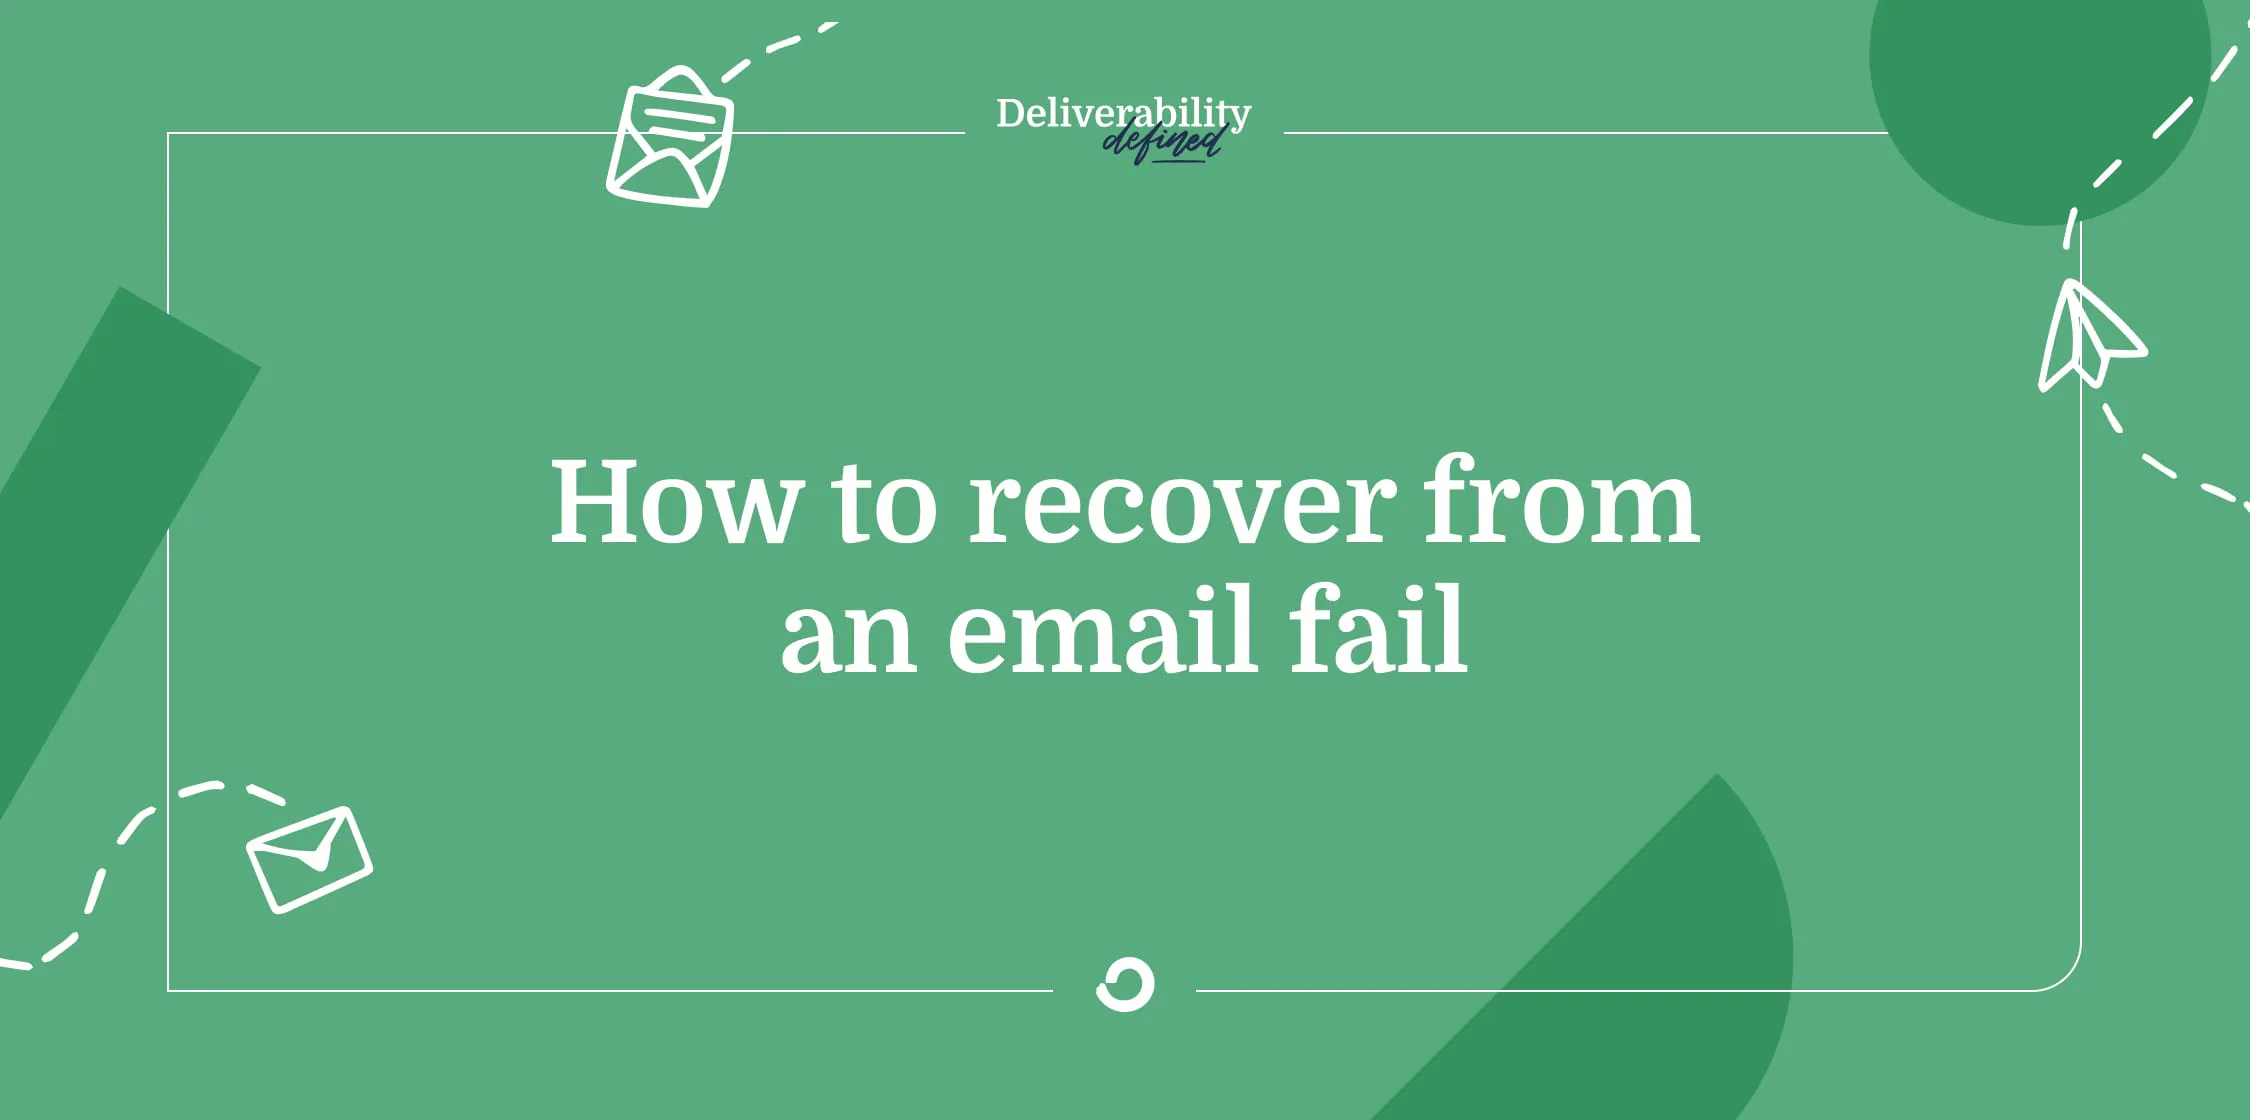 How to recover from an email fail